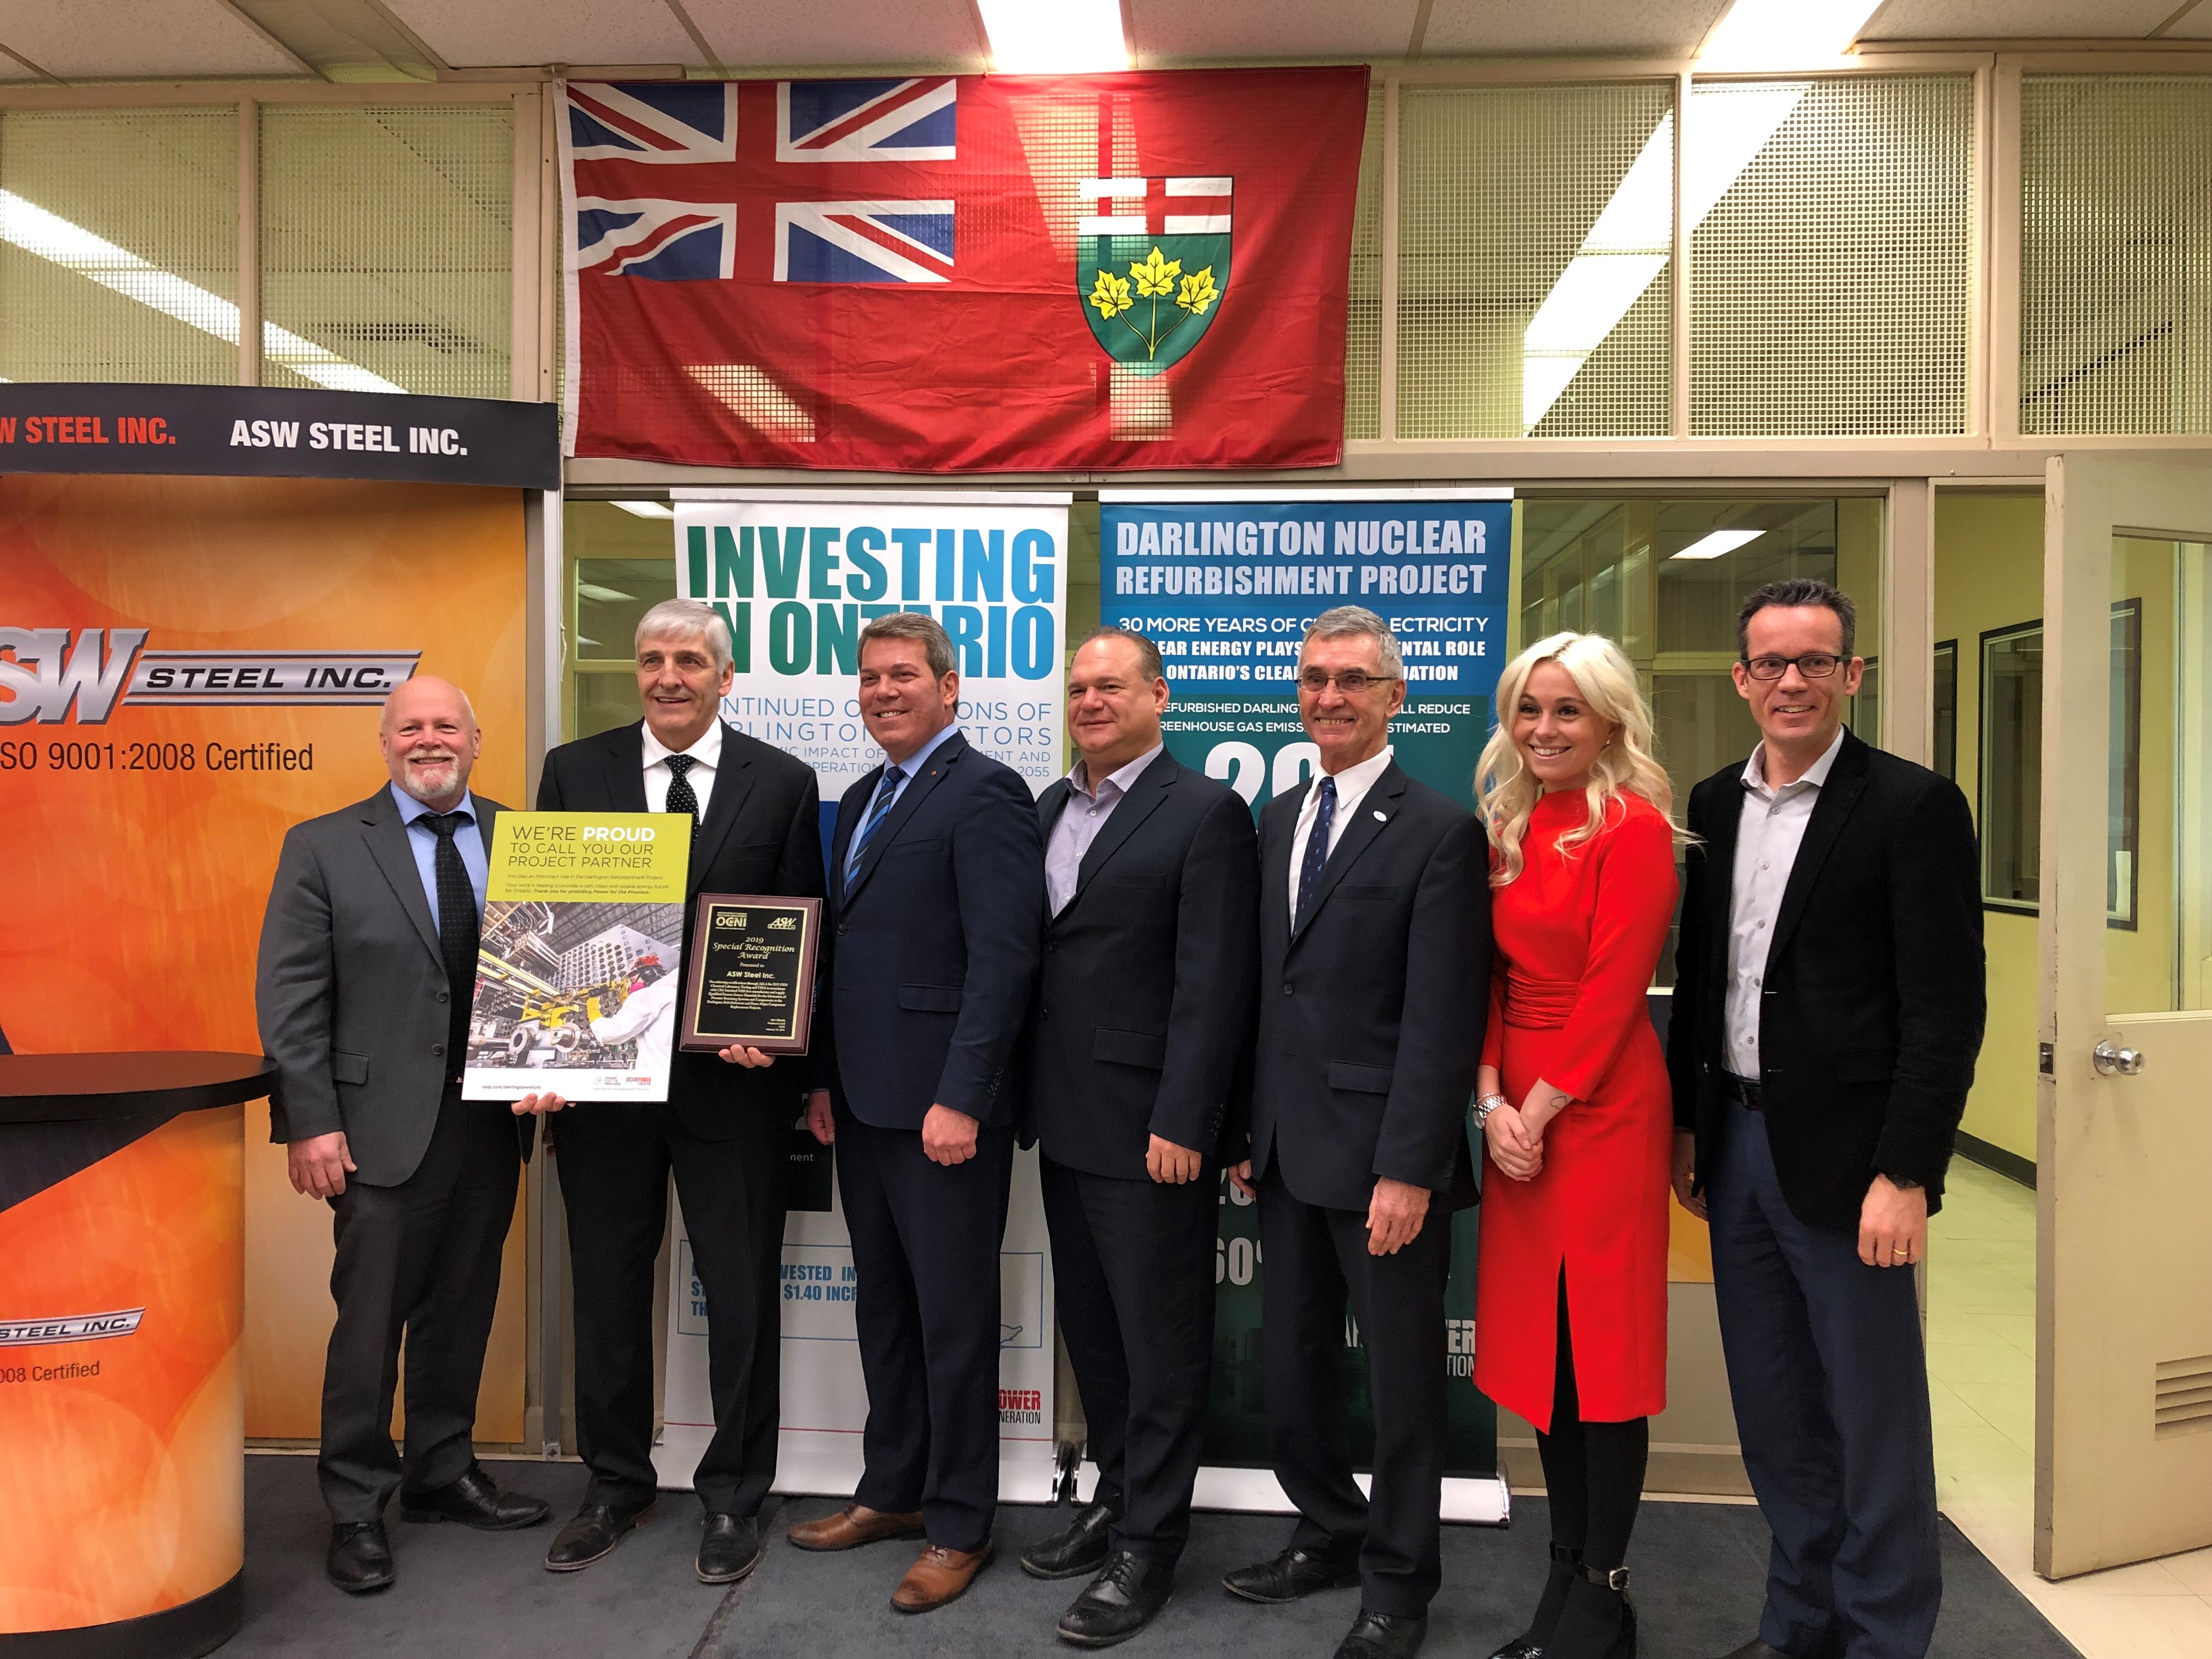 Group Photo (from left to right): Mayor Frank Campion, Tim Clutterbuck ASW Steel, MP Vance Badawey, MPP Jeff Burch, Ron Oberth OCNI, Taylor McKenna Bruce Power, Chris Fralick OPG